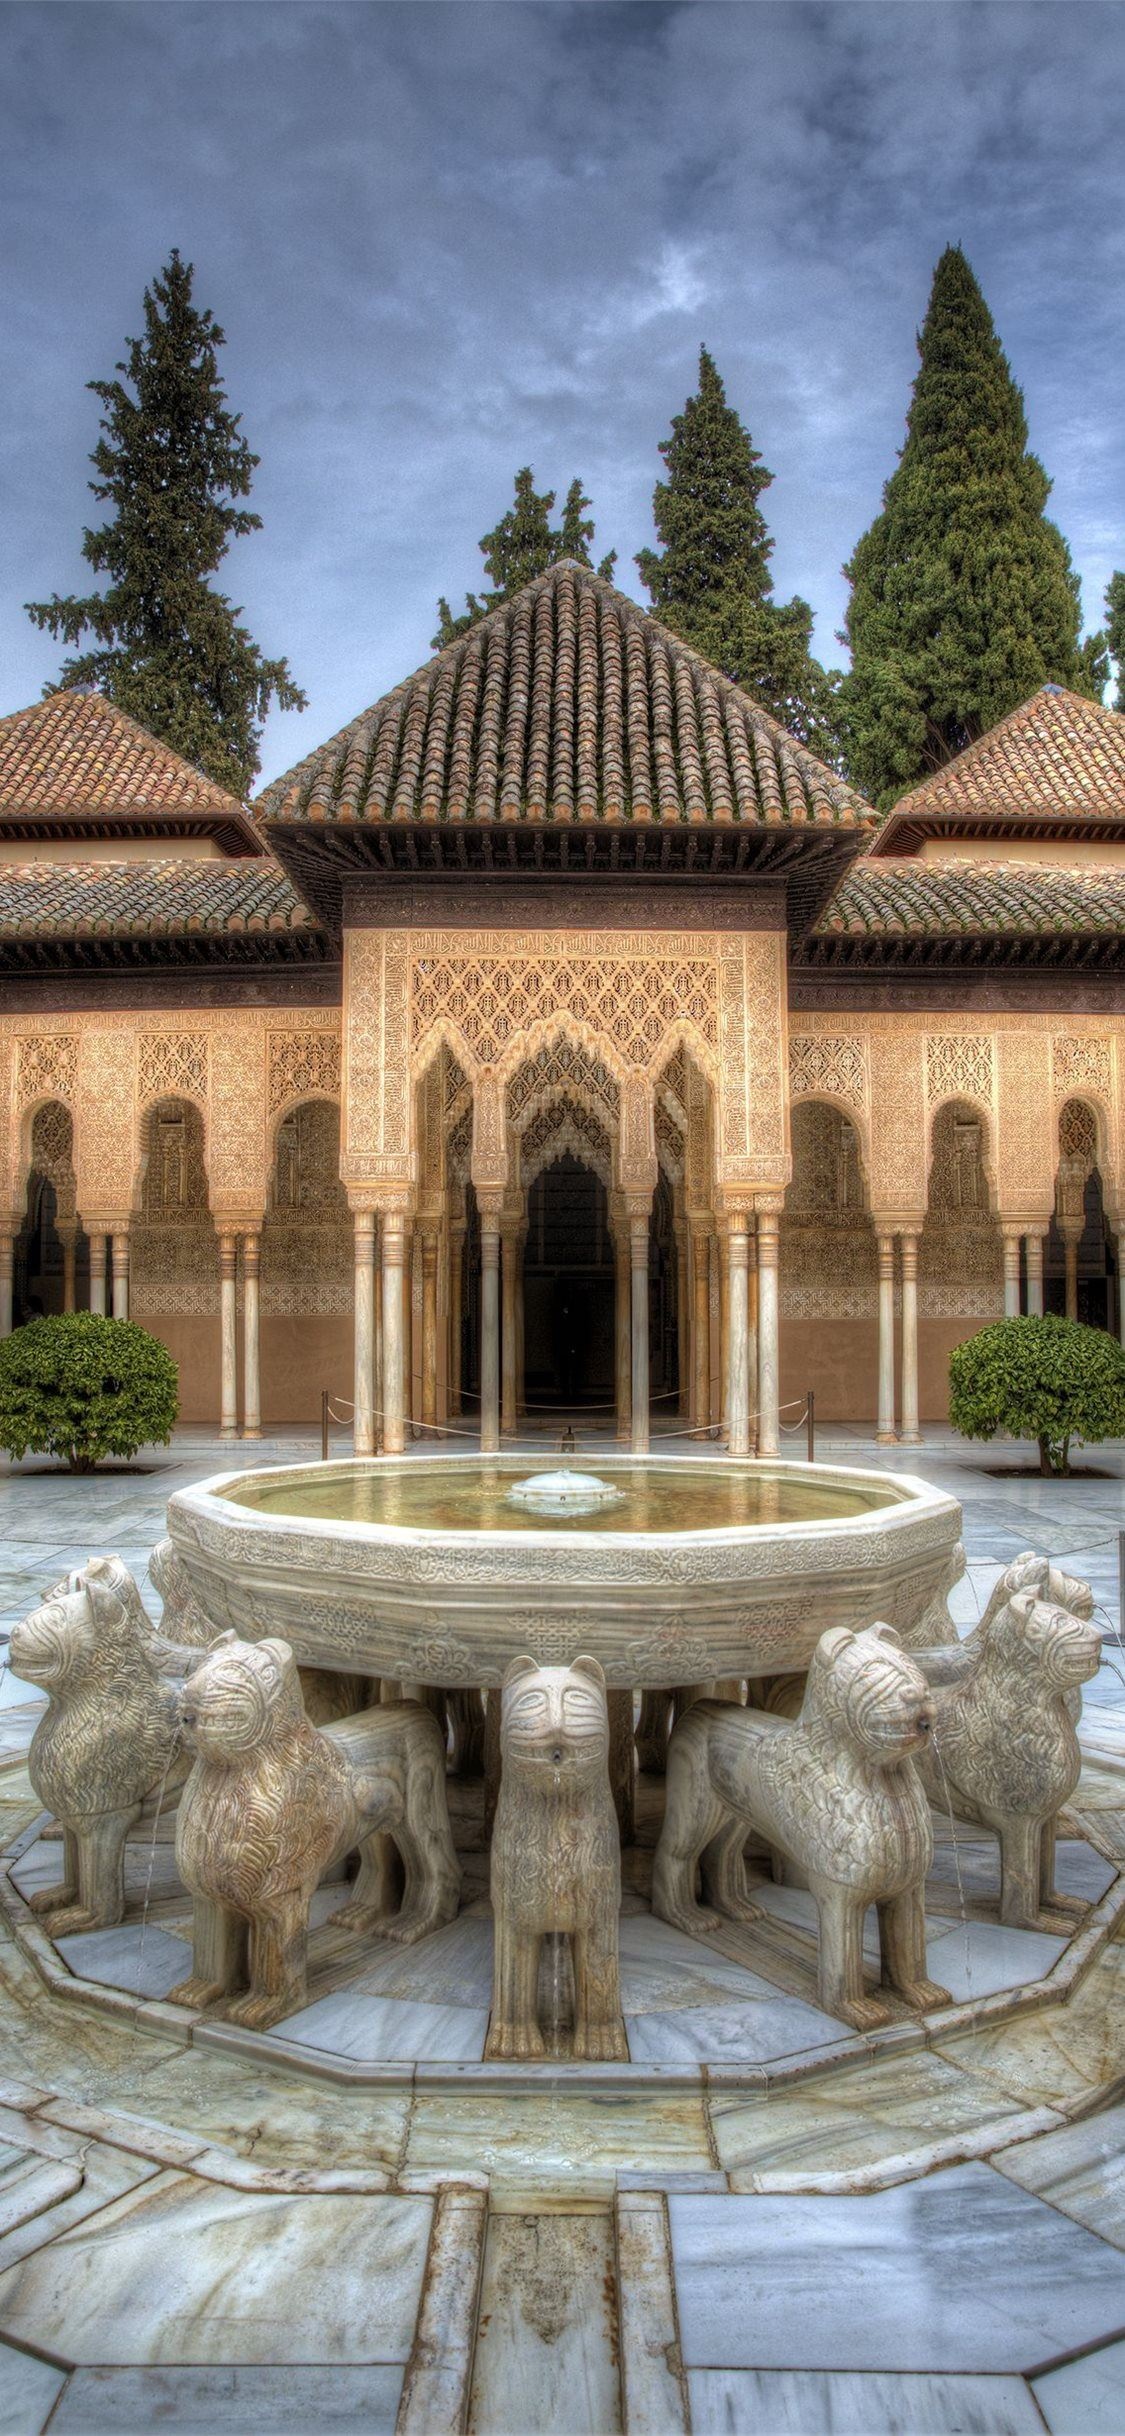 Alhambra Palace, Stunning iPhone wallpapers, Artistic beauty, HD images, 1130x2440 HD Handy